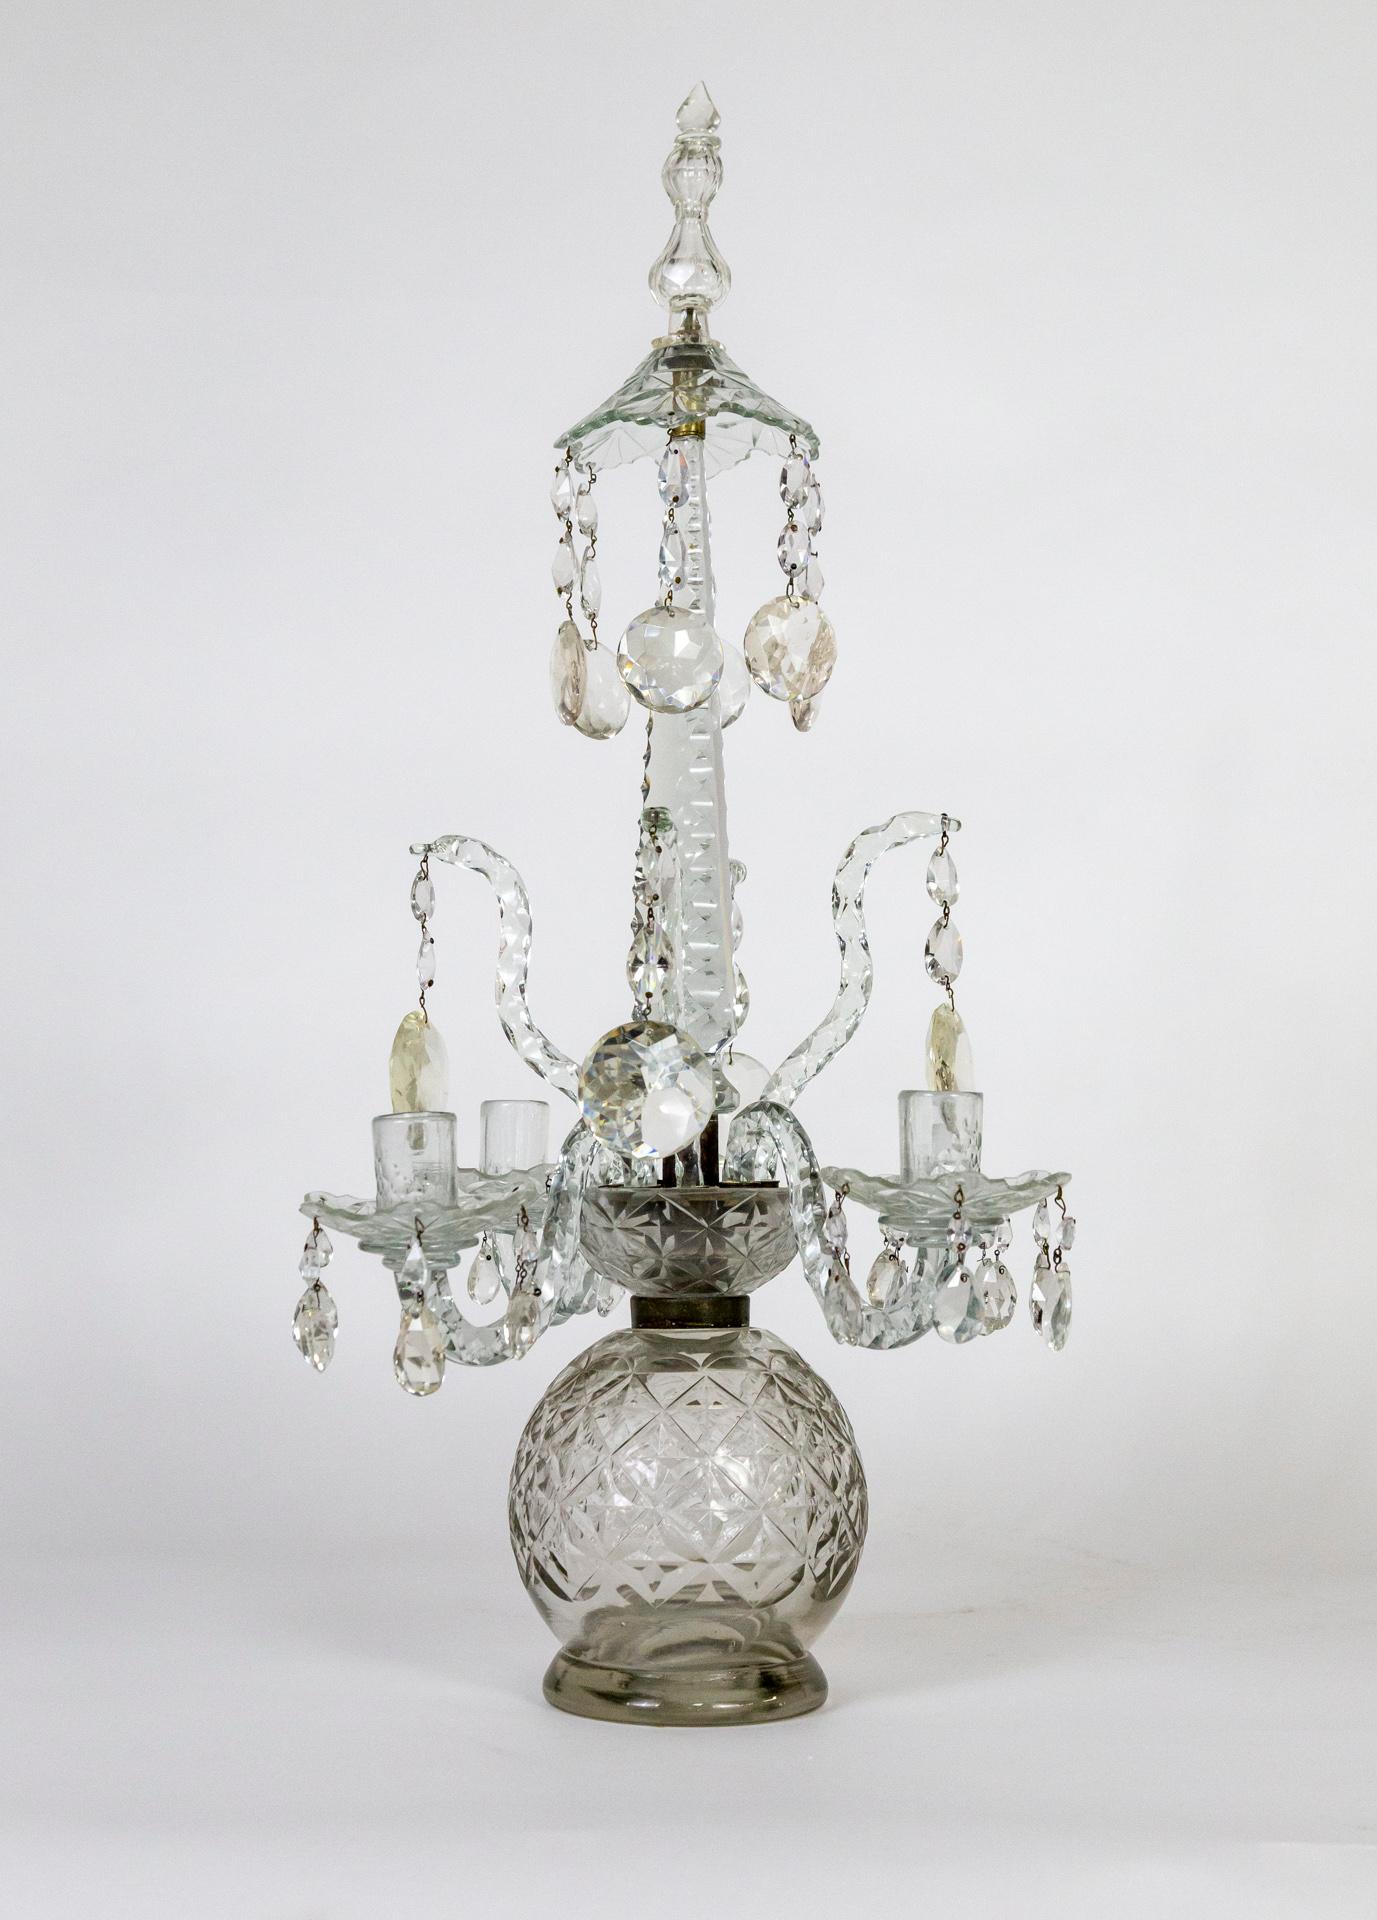 Henry iii 19th Cent. Cut Crystal 4-Arm Candelabra For Sale 7